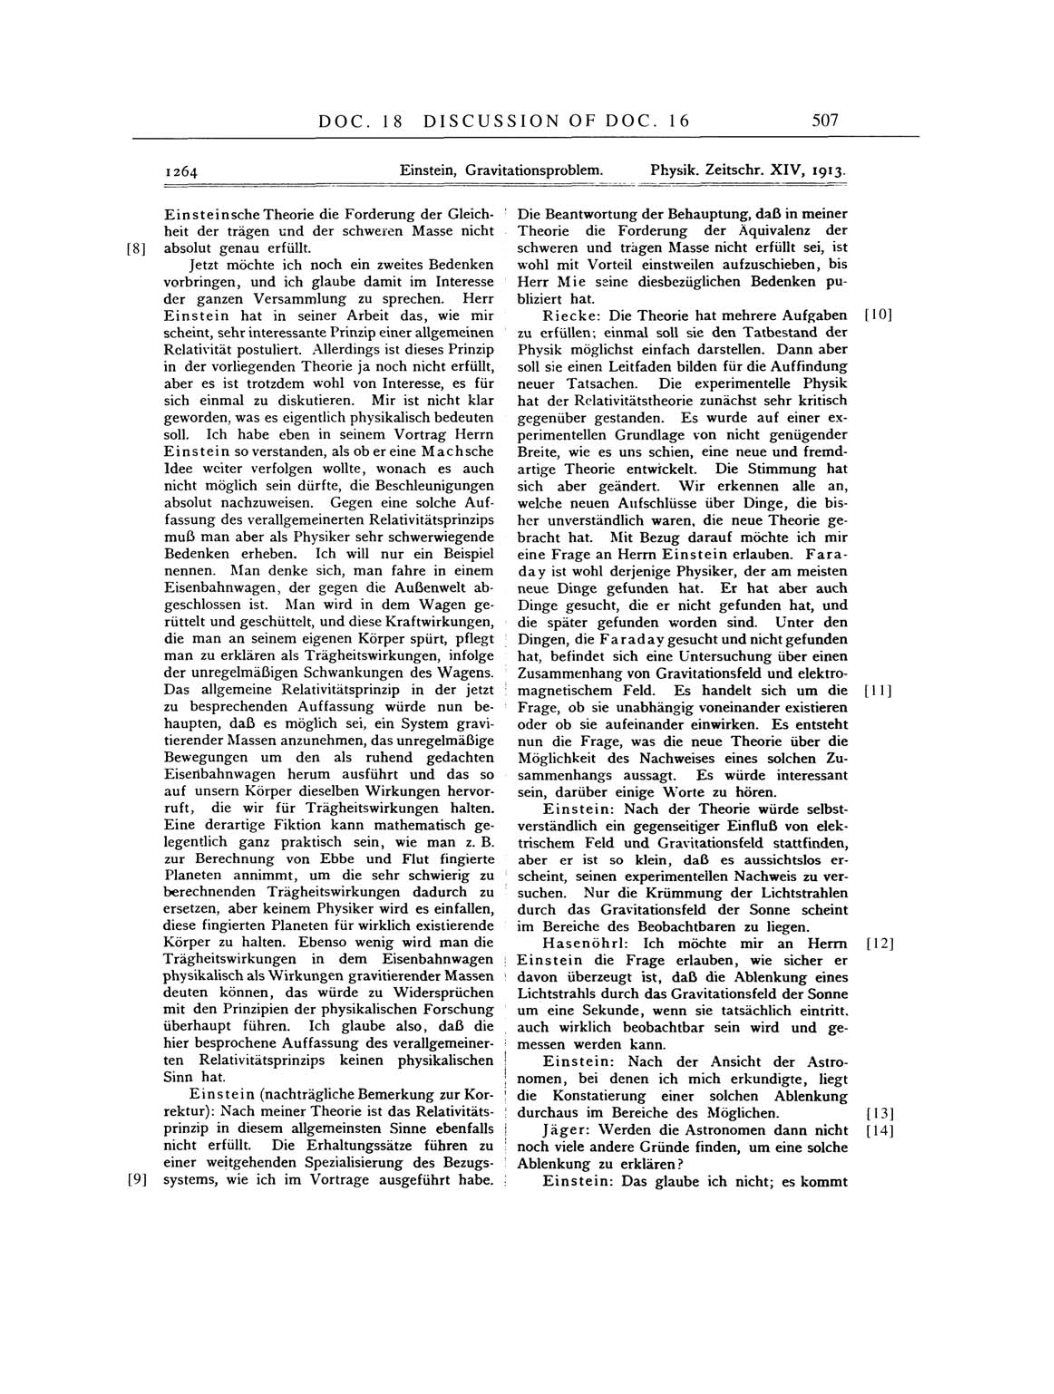 Volume 4: The Swiss Years: Writings 1912-1914 page 507